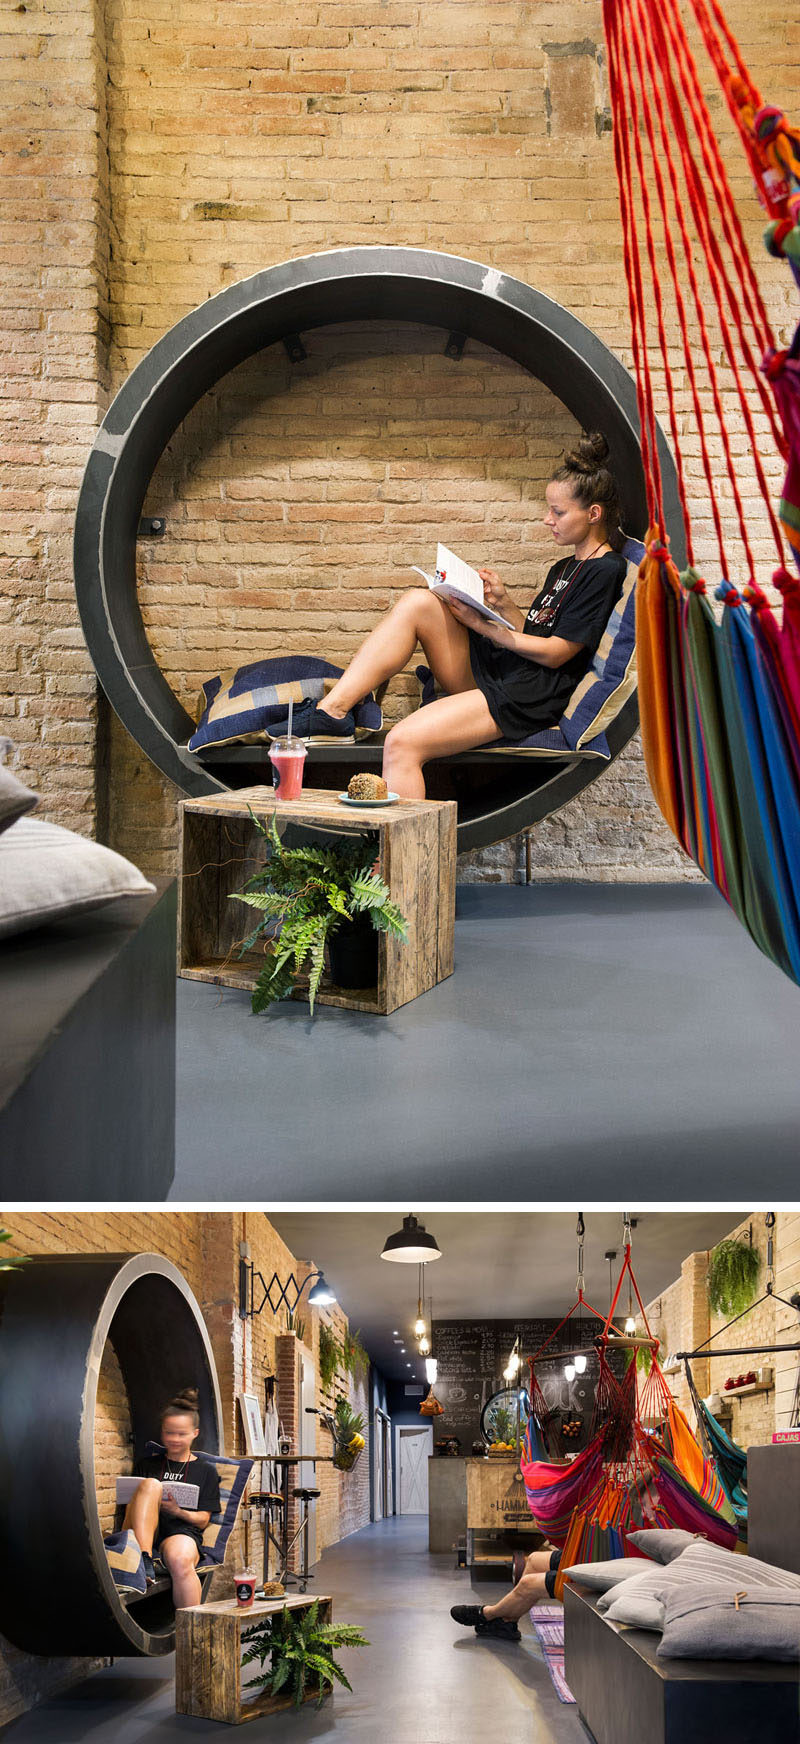 This circular reading nook with comfy pillows is inside a juice bar in Barcelona.